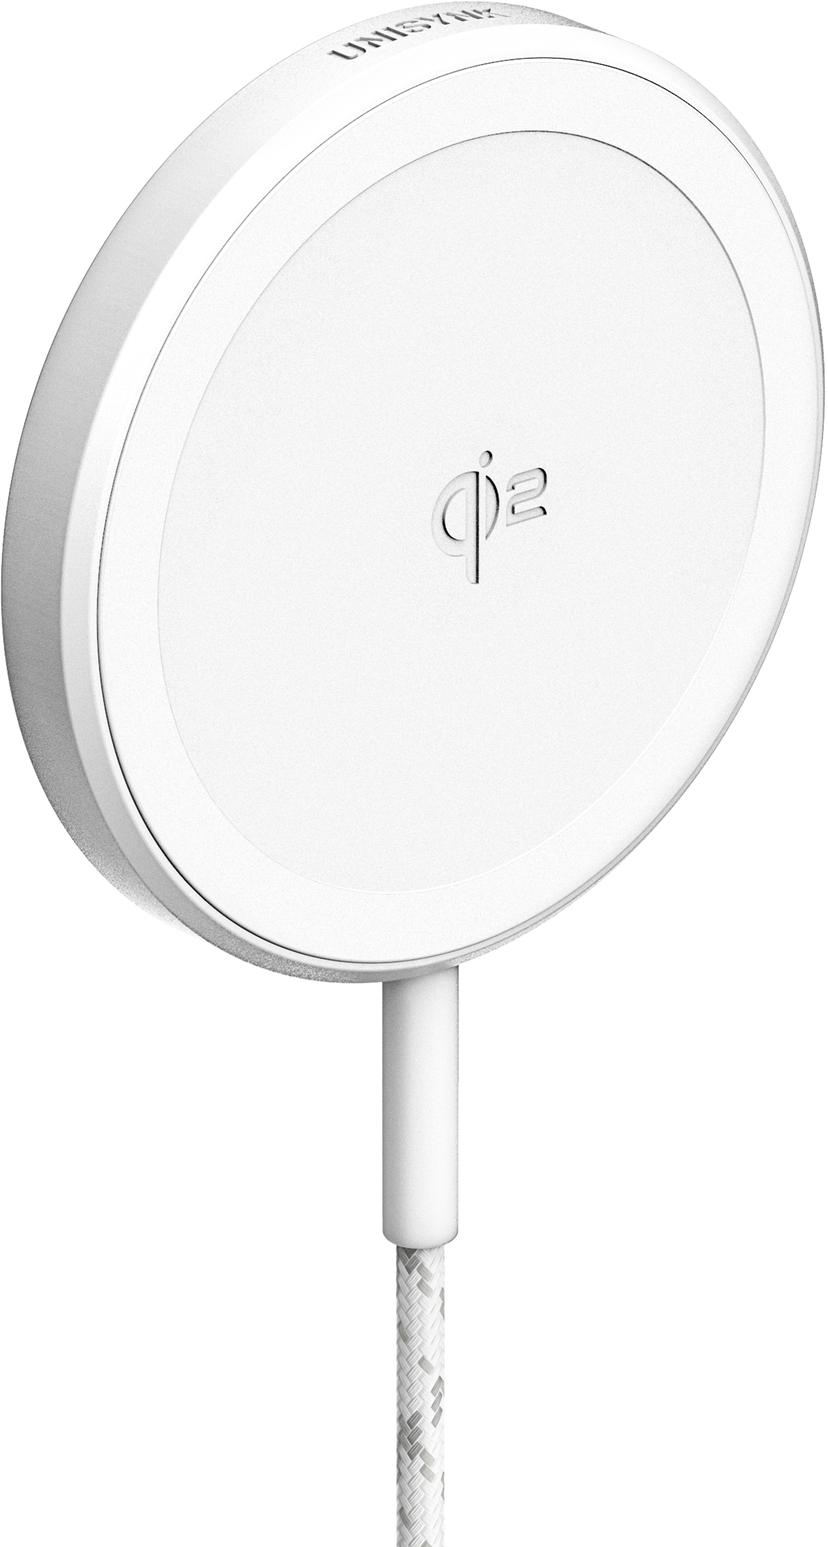 Unisynk Magnetic Wireless Charger Qi2 15W Valkoinen 2m